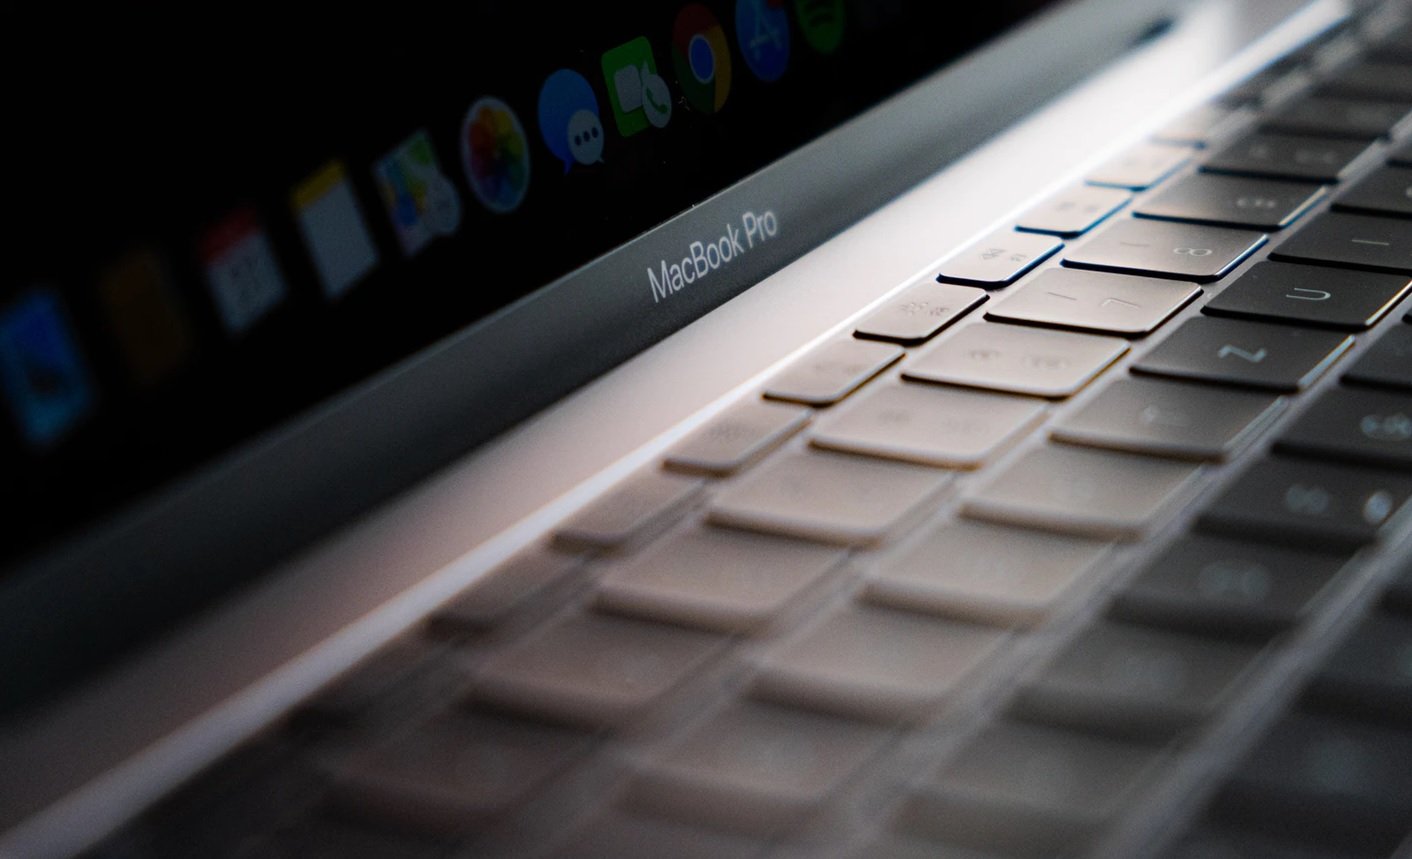   Starting ?  The new MacBook Pro is said to have entered production

